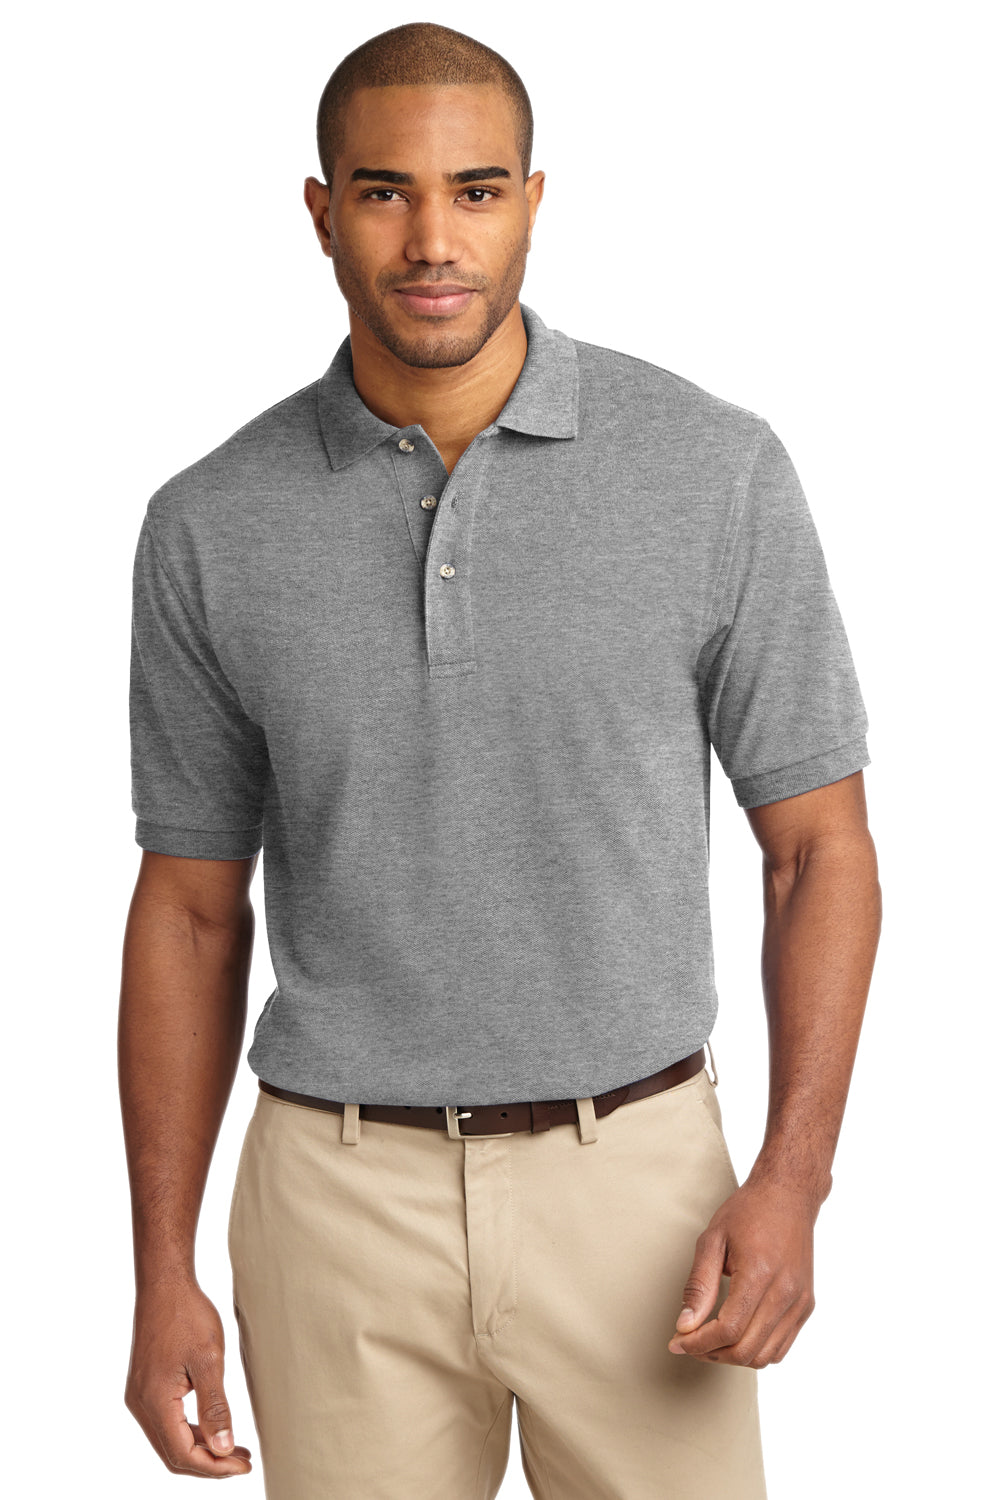 Port Authority K420 Mens Short Sleeve Polo Shirt Oxford Grey Front